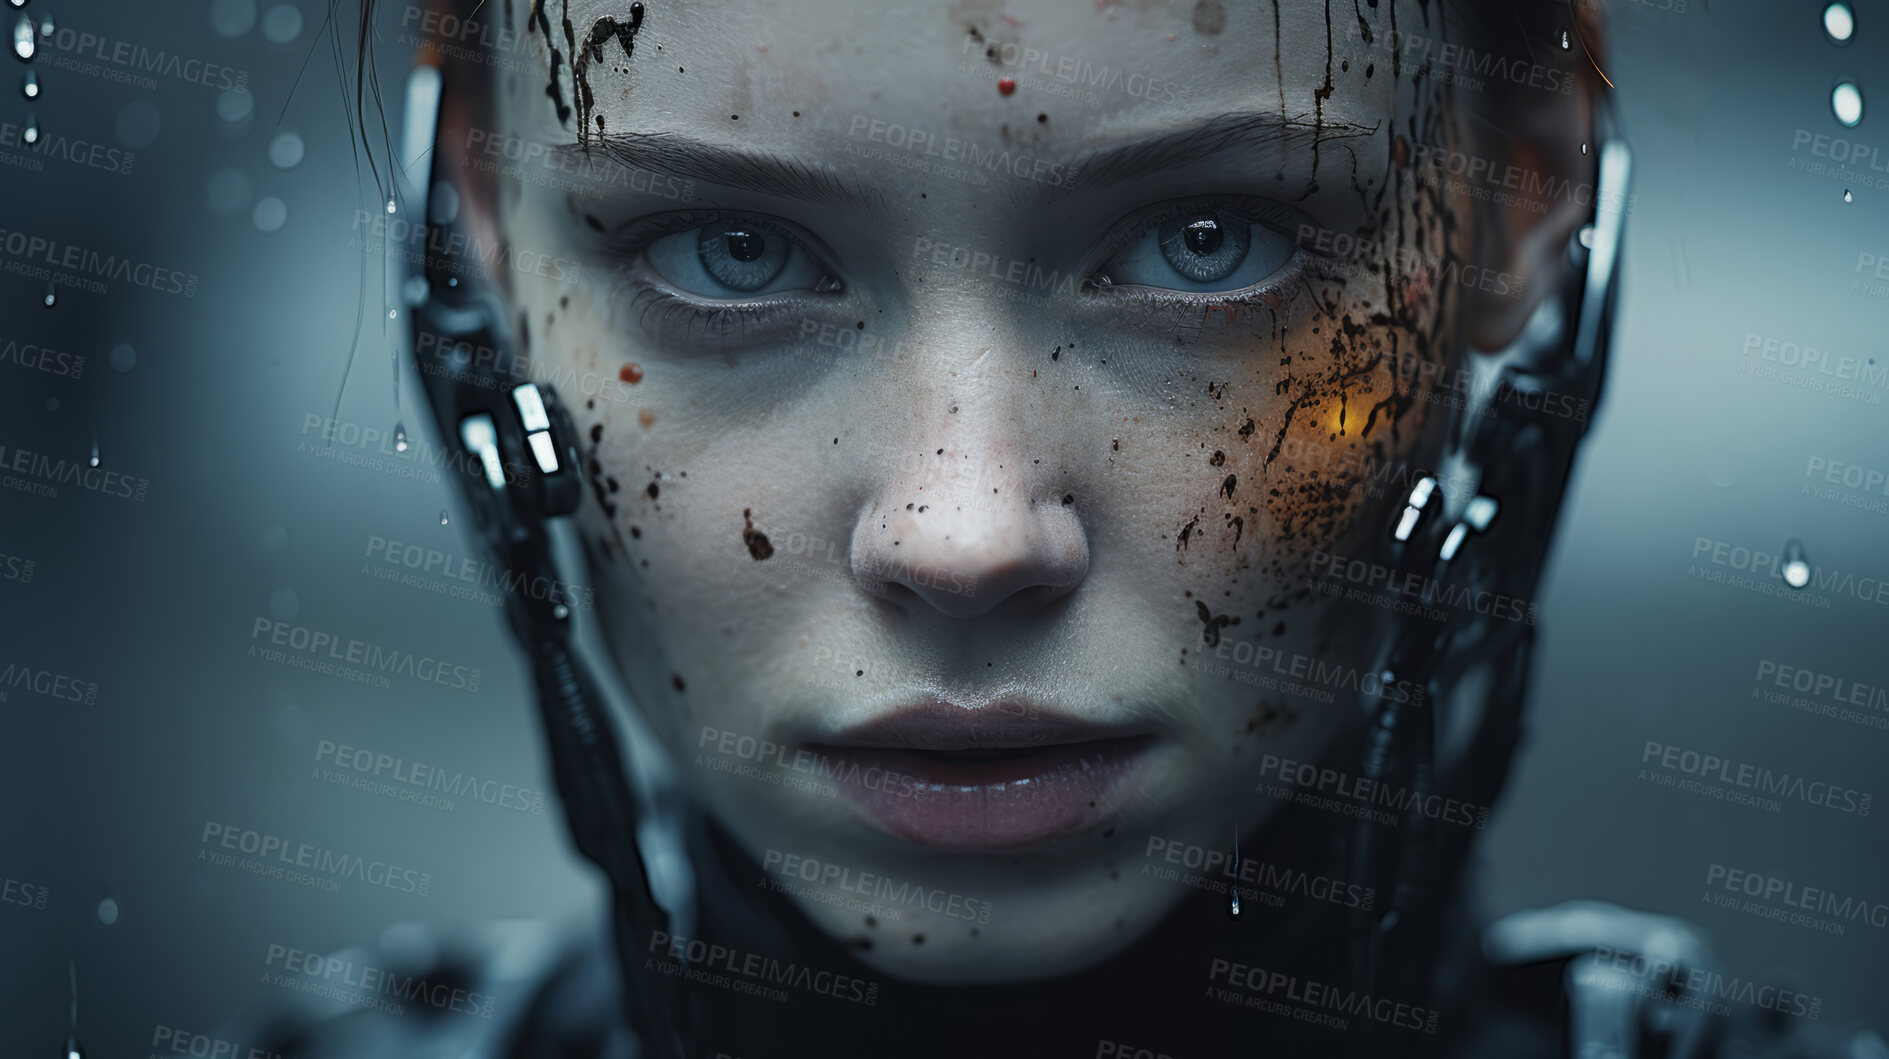 Buy stock photo Close up of futuristic, robotic humanoid. Human face with mechanical body sci-fi cyberpunk dystopia.